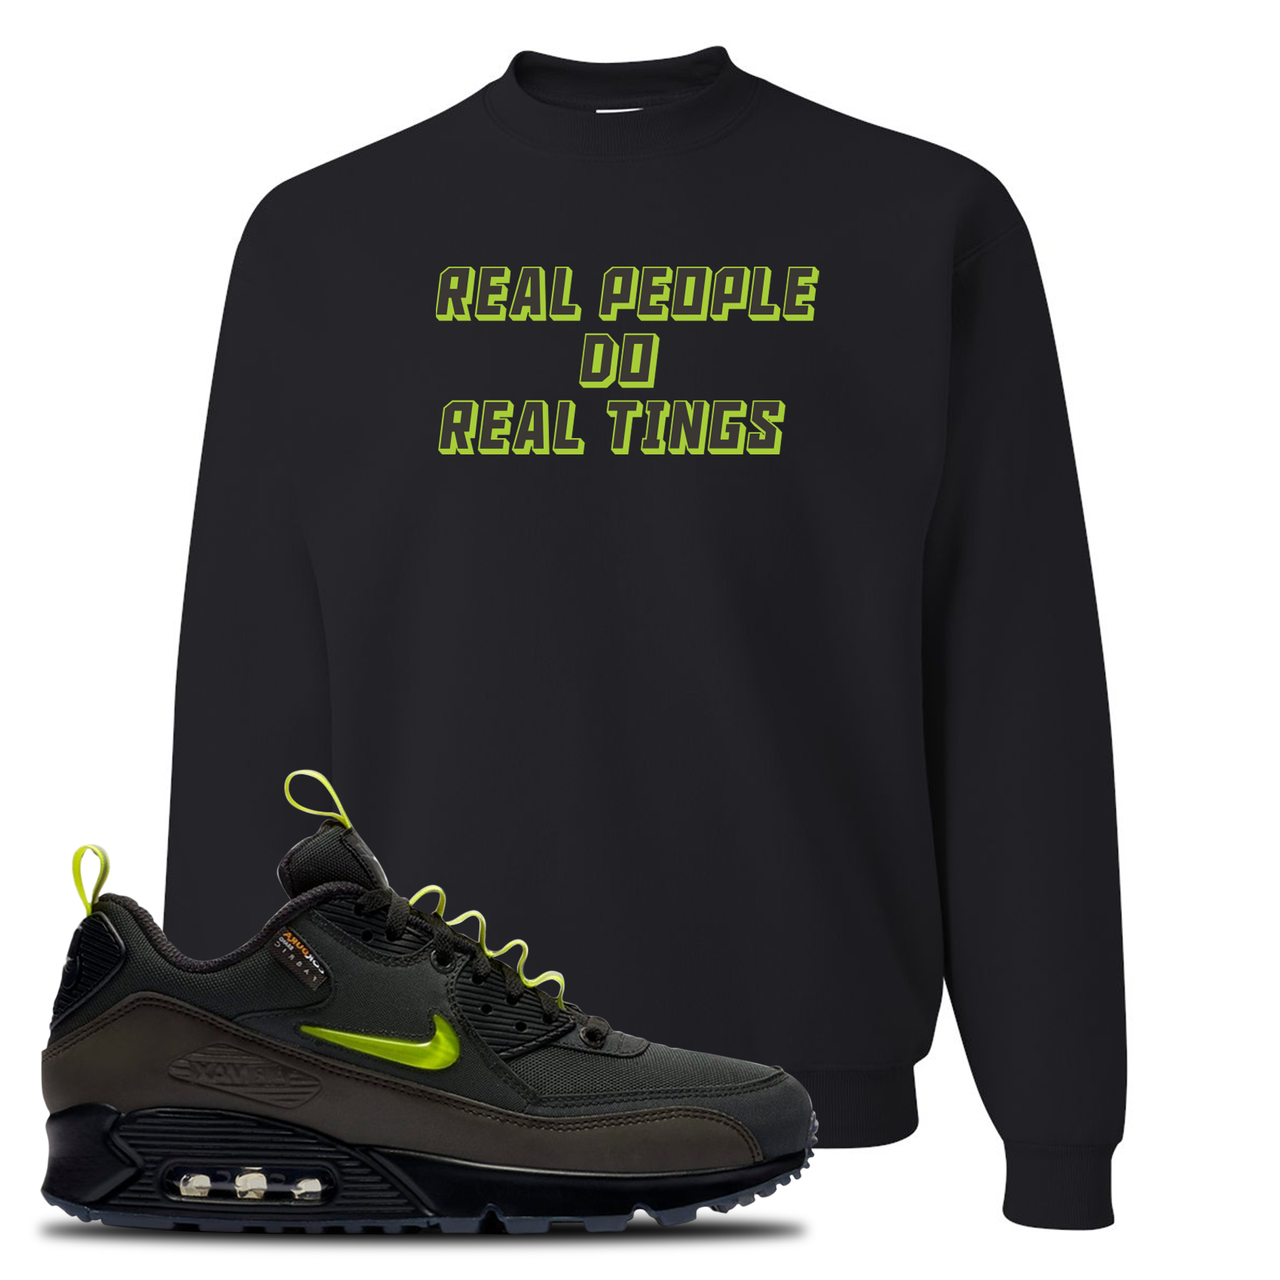 The Basement X Air Max 90 Manchester Real People Do Real Things Black Sneaker Hook Up Crewneck Sweatshirt